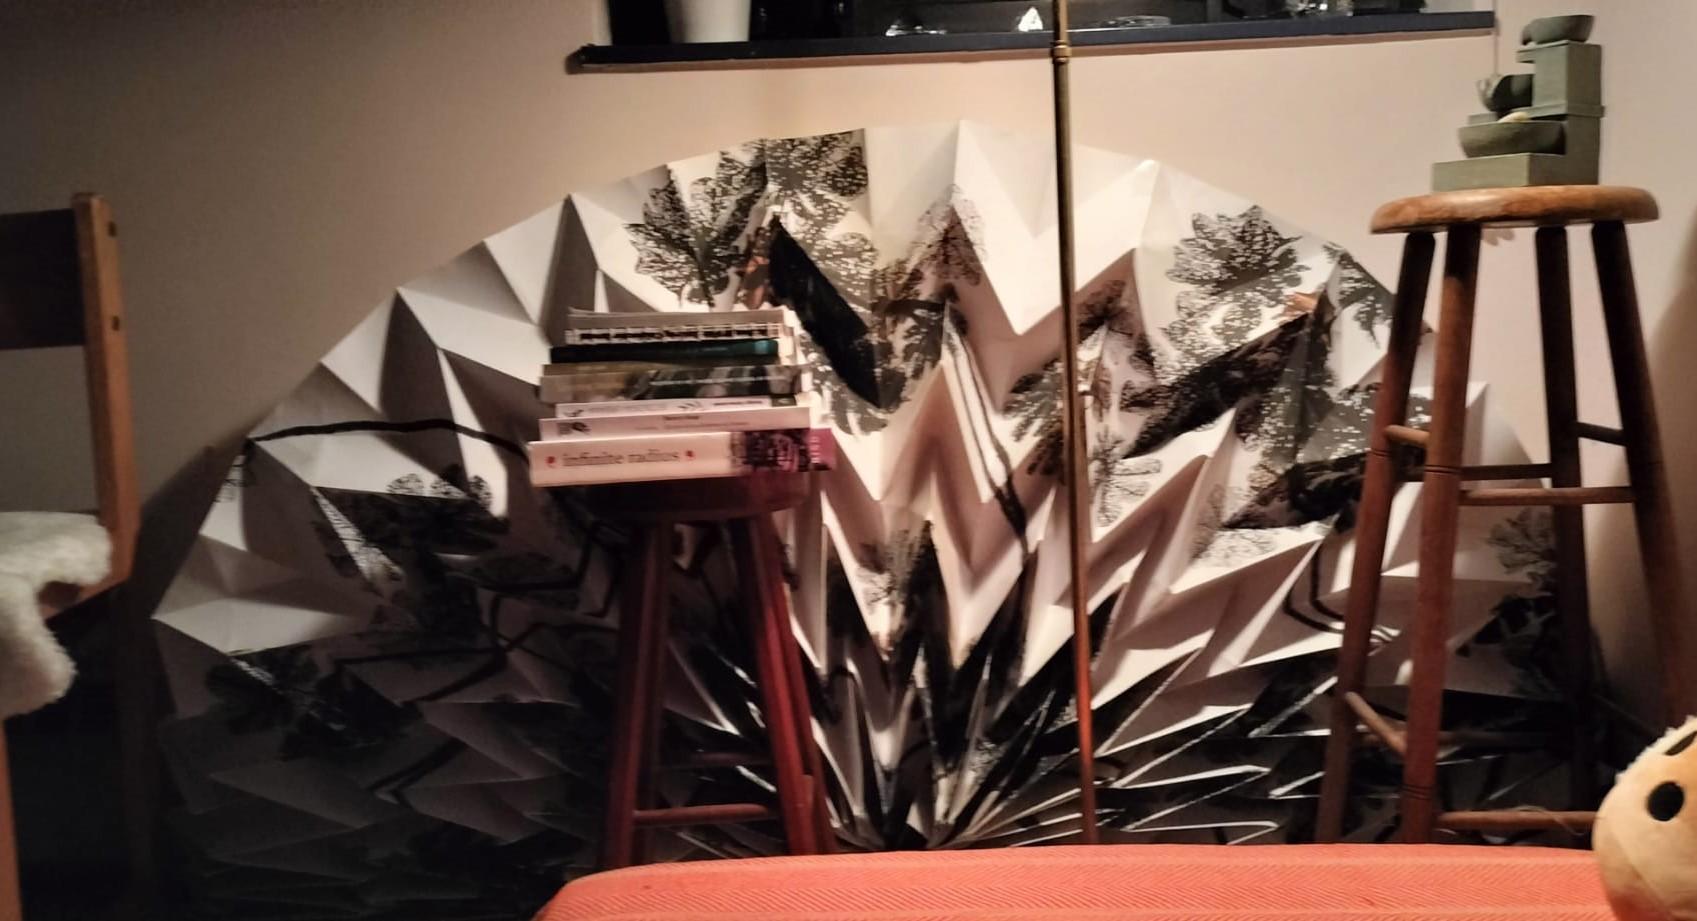 Living room decor inspired by origami fan.